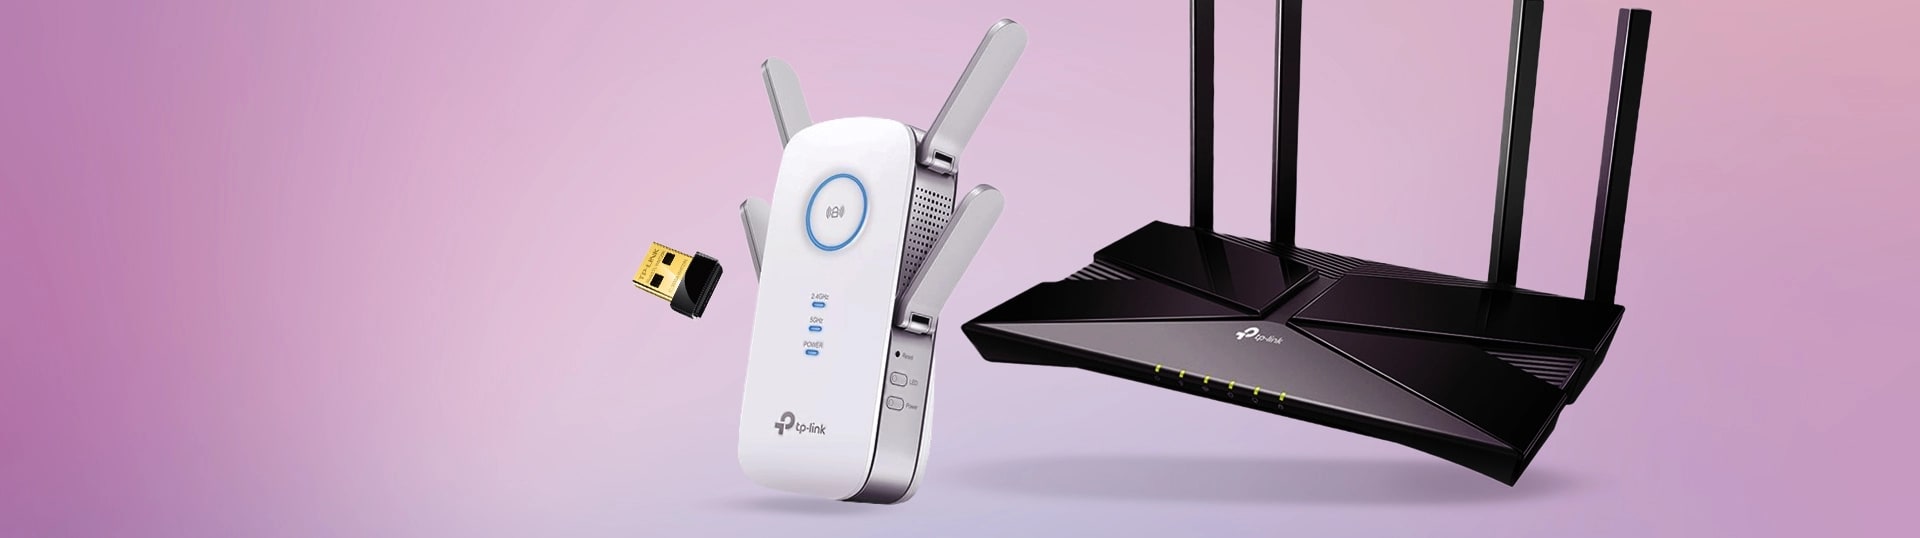 TP link adapter router and dual channel